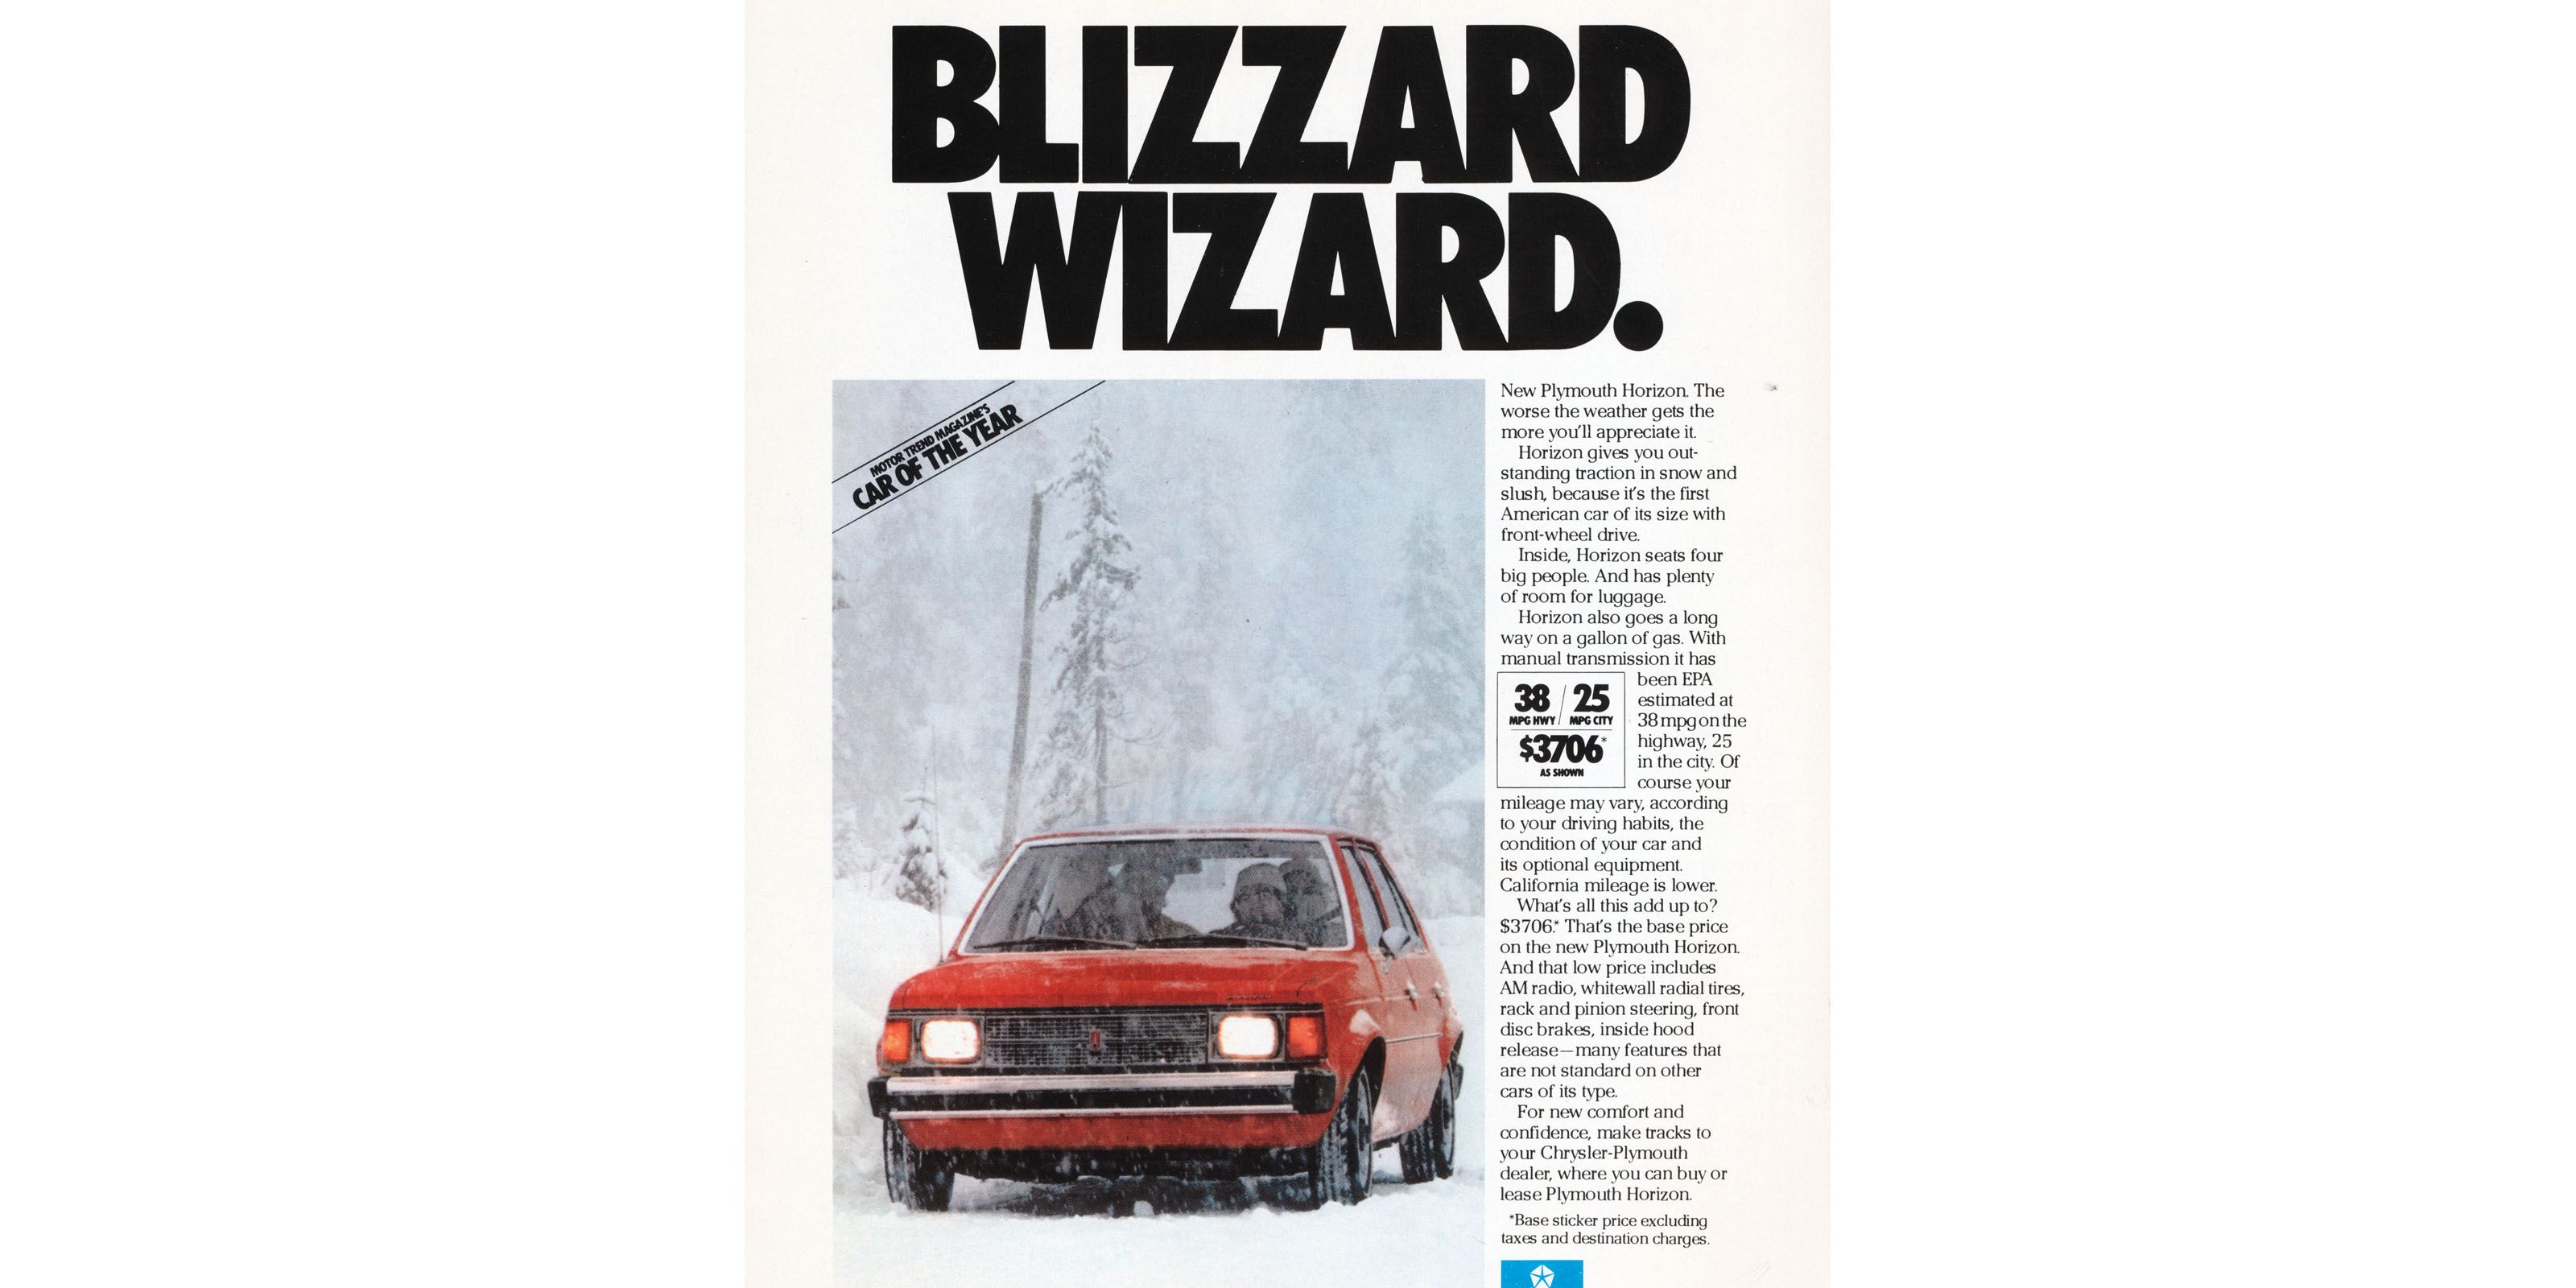 1978 Plymouth Horizon Is the Blizzard Wizard